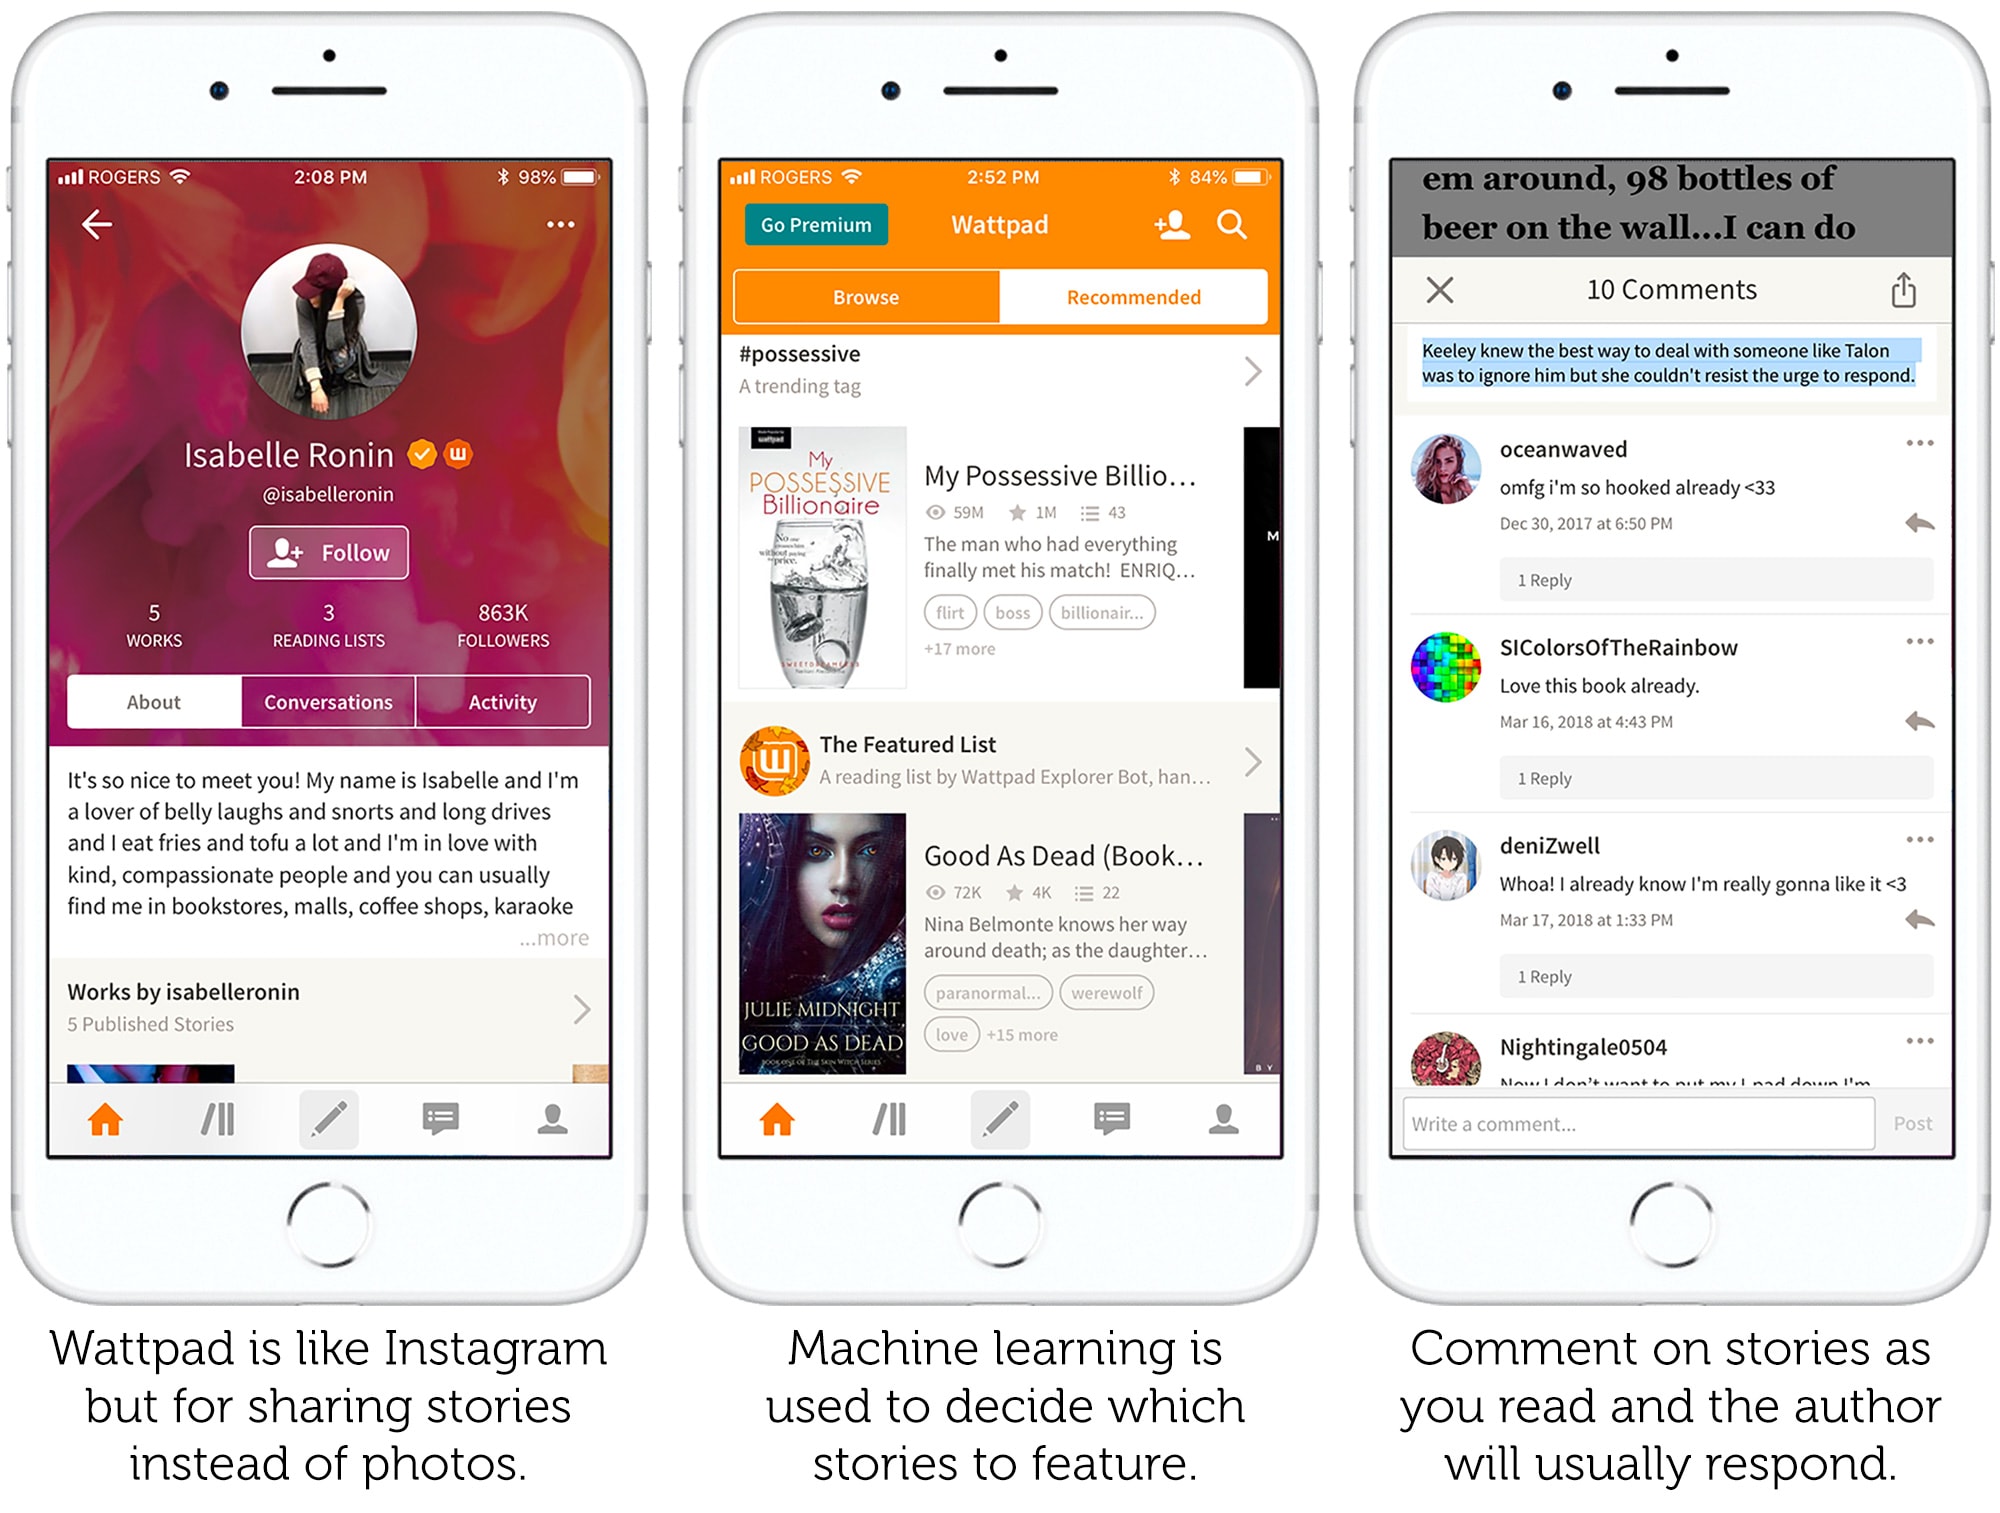 Wattpad is a social network for sharing stories.